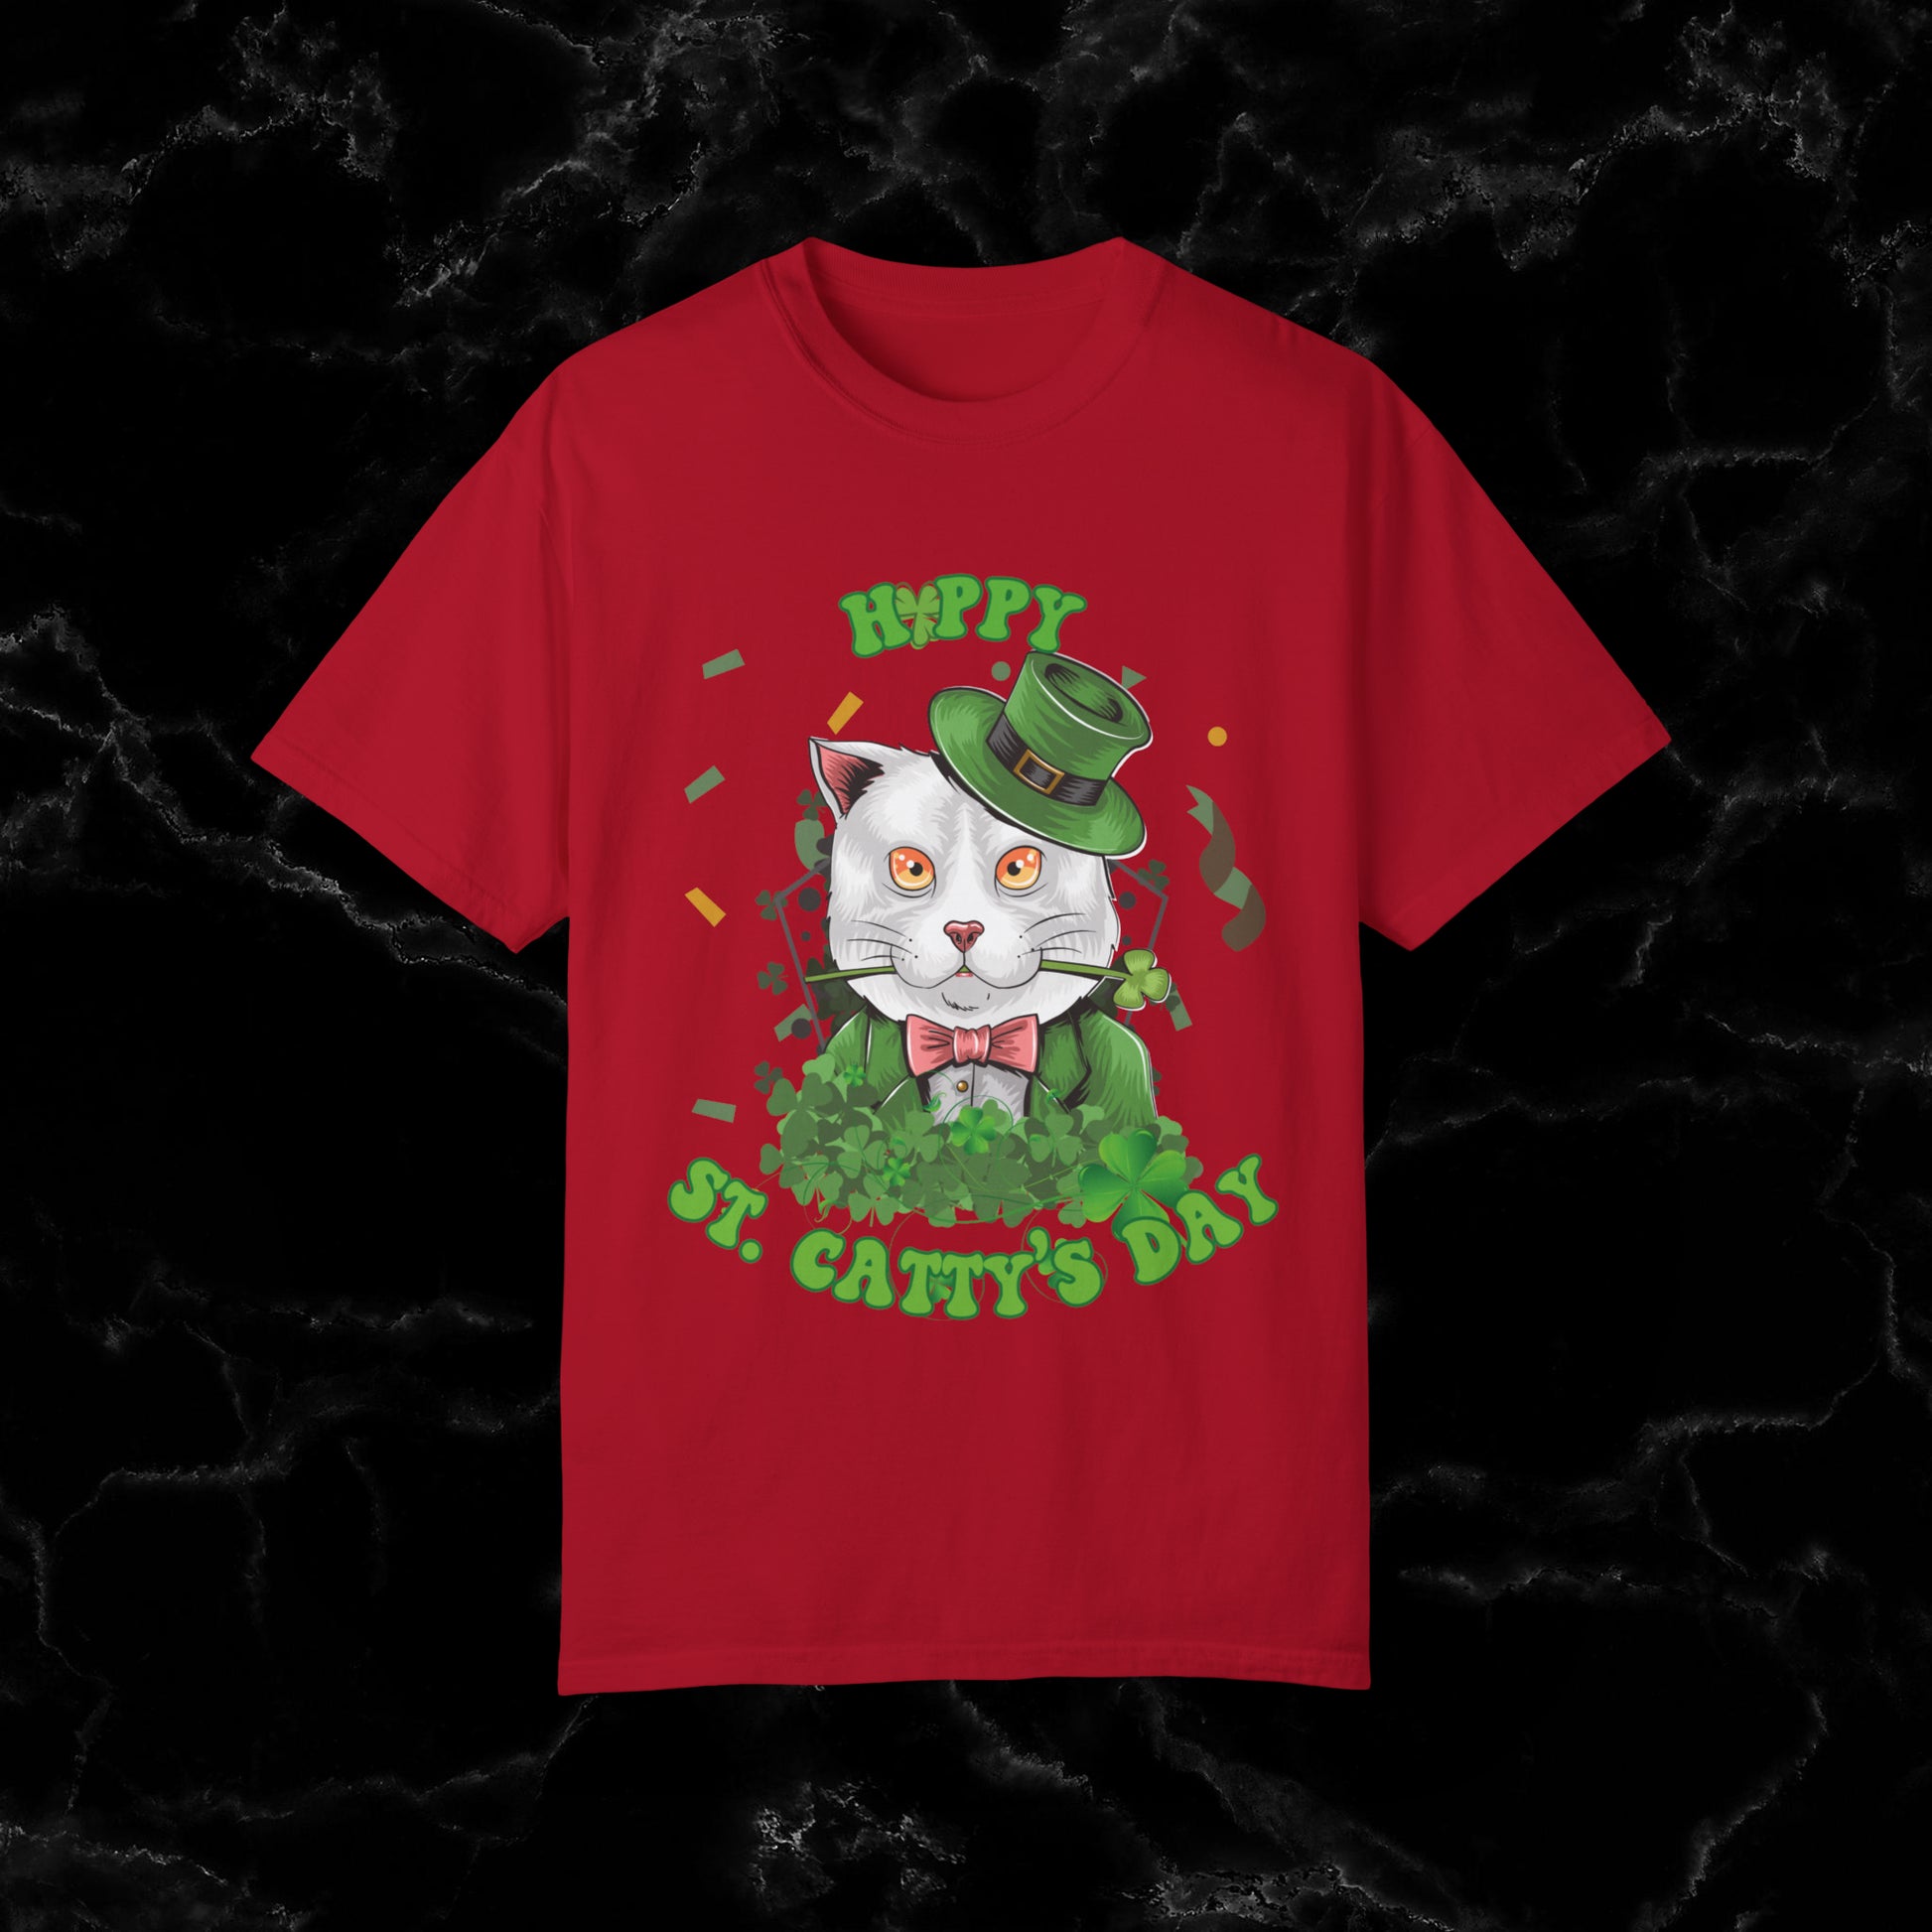 Happy St. Catty's Day Funny St. Patrick's Day Comfort Colors T-Shirt - St. Paddy's Day Shirt for Cat Lover St. Patty's Day Fun T-Shirt Red S 